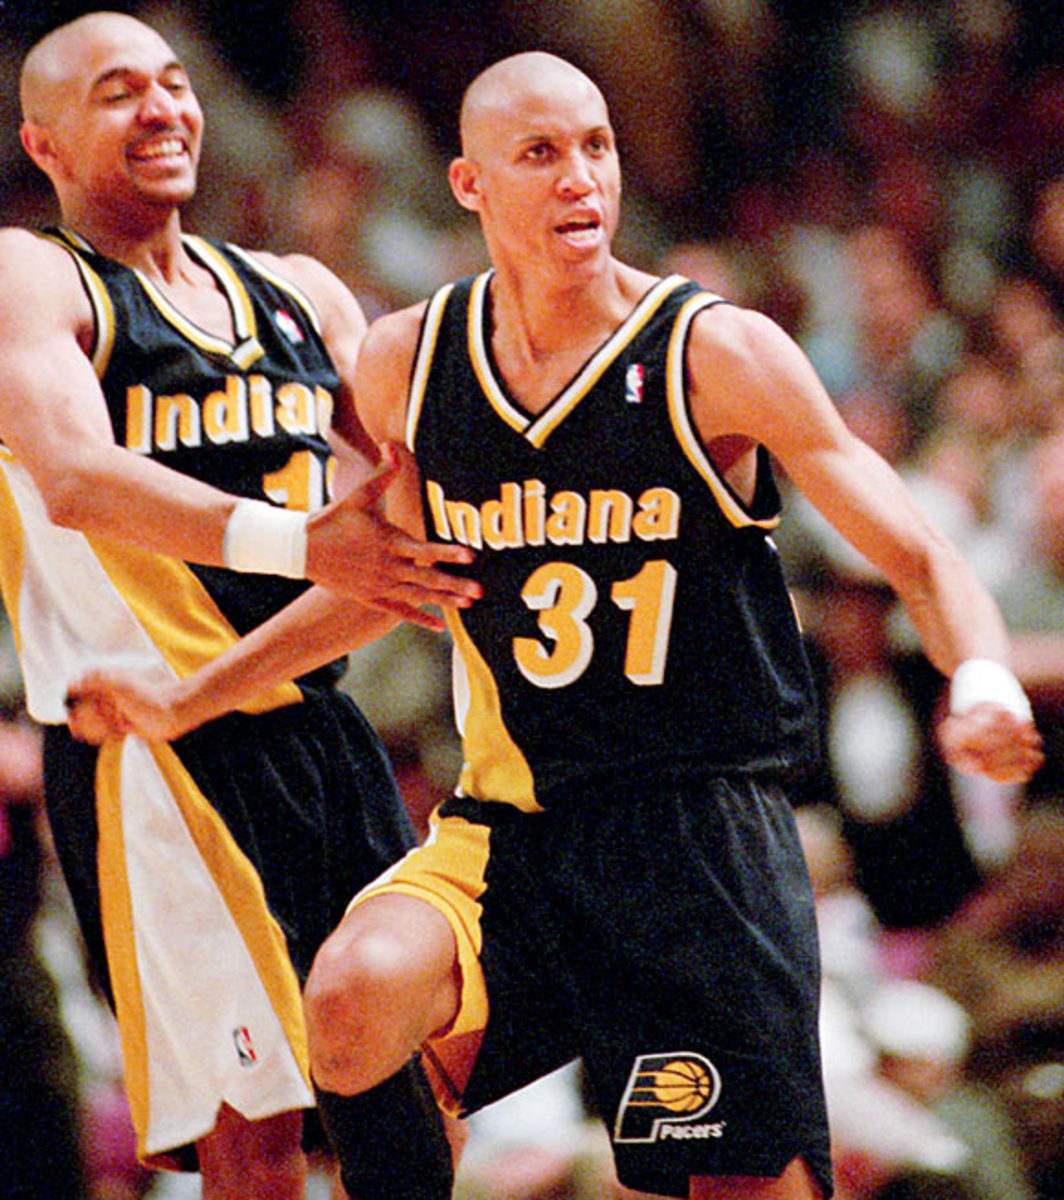 Reggie Miller scores eight points in 8.9 seconds to beat Knicks 